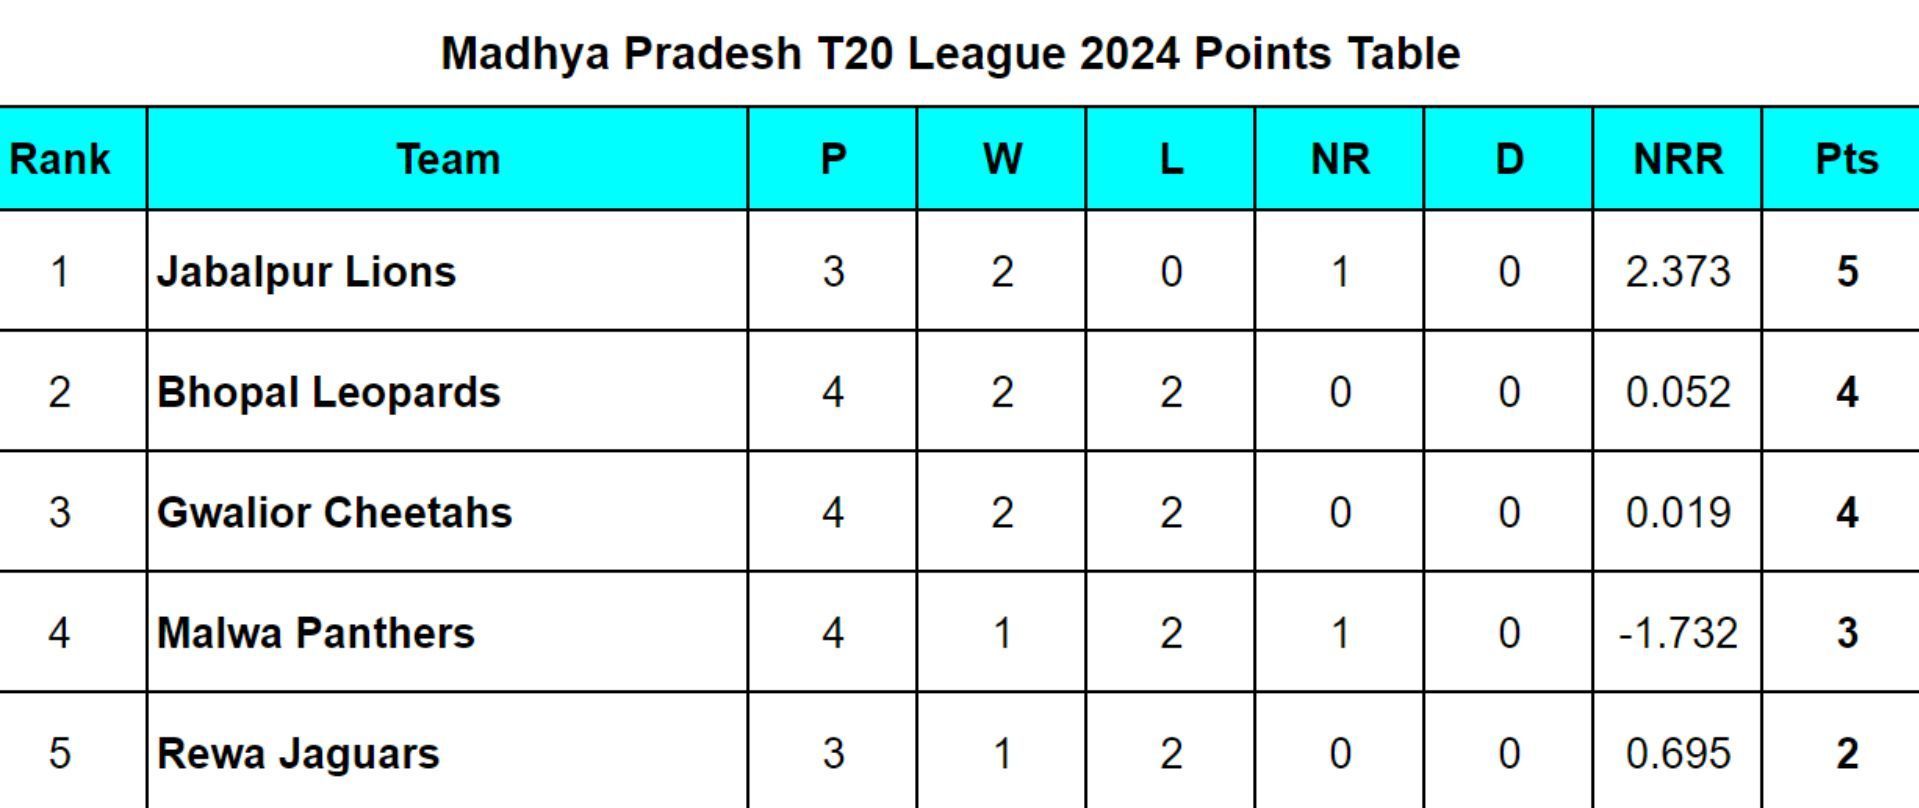 Madhya Pradesh T20 League 2024 Points Table Updated after Match 10